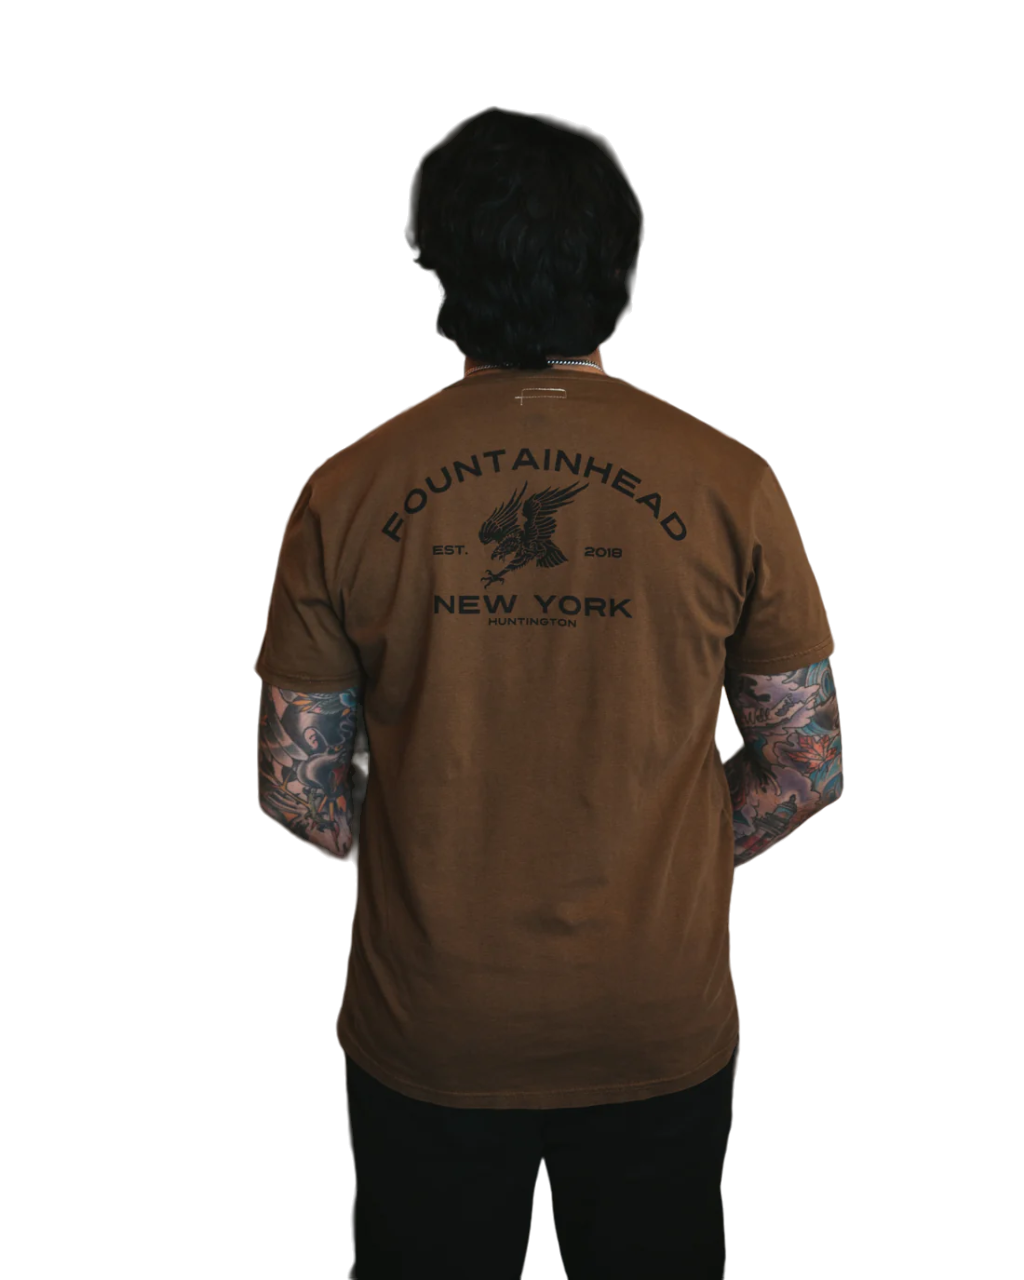 Fountainhead NY - Est 2018 Eagle T-Shirt in Brown